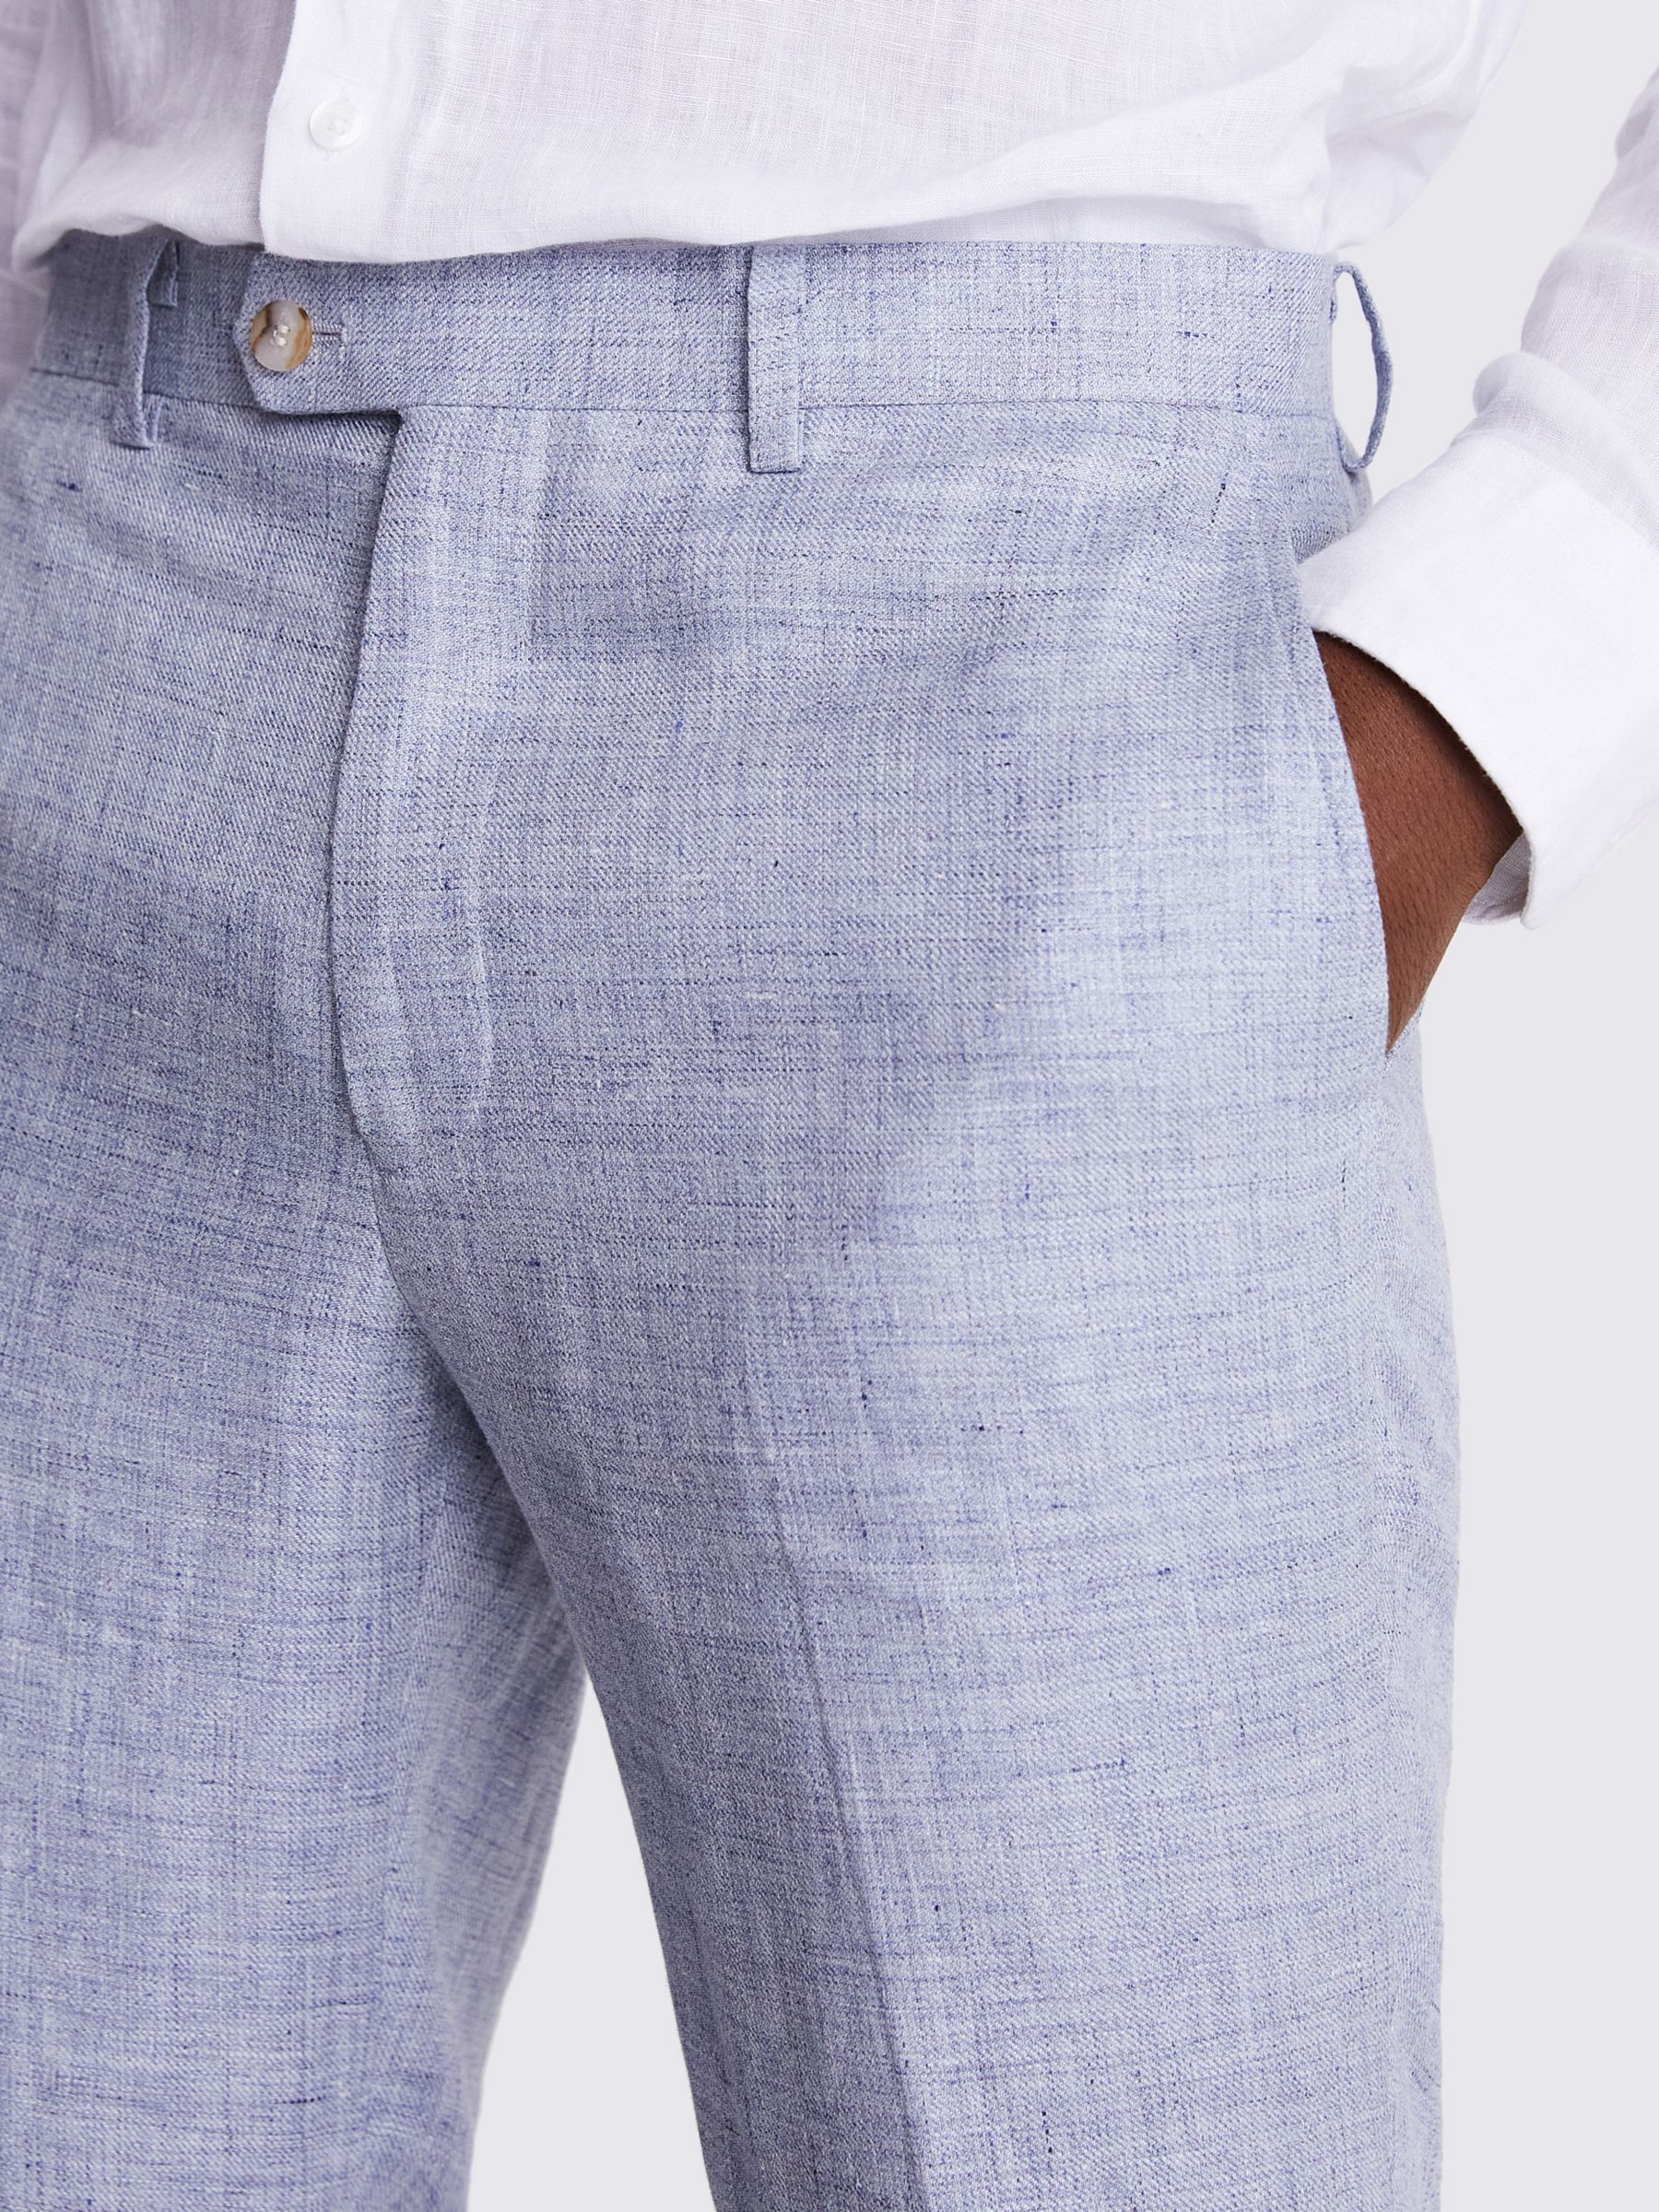 Buy Moss Tailored Fit Linen Trousers Online at johnlewis.com